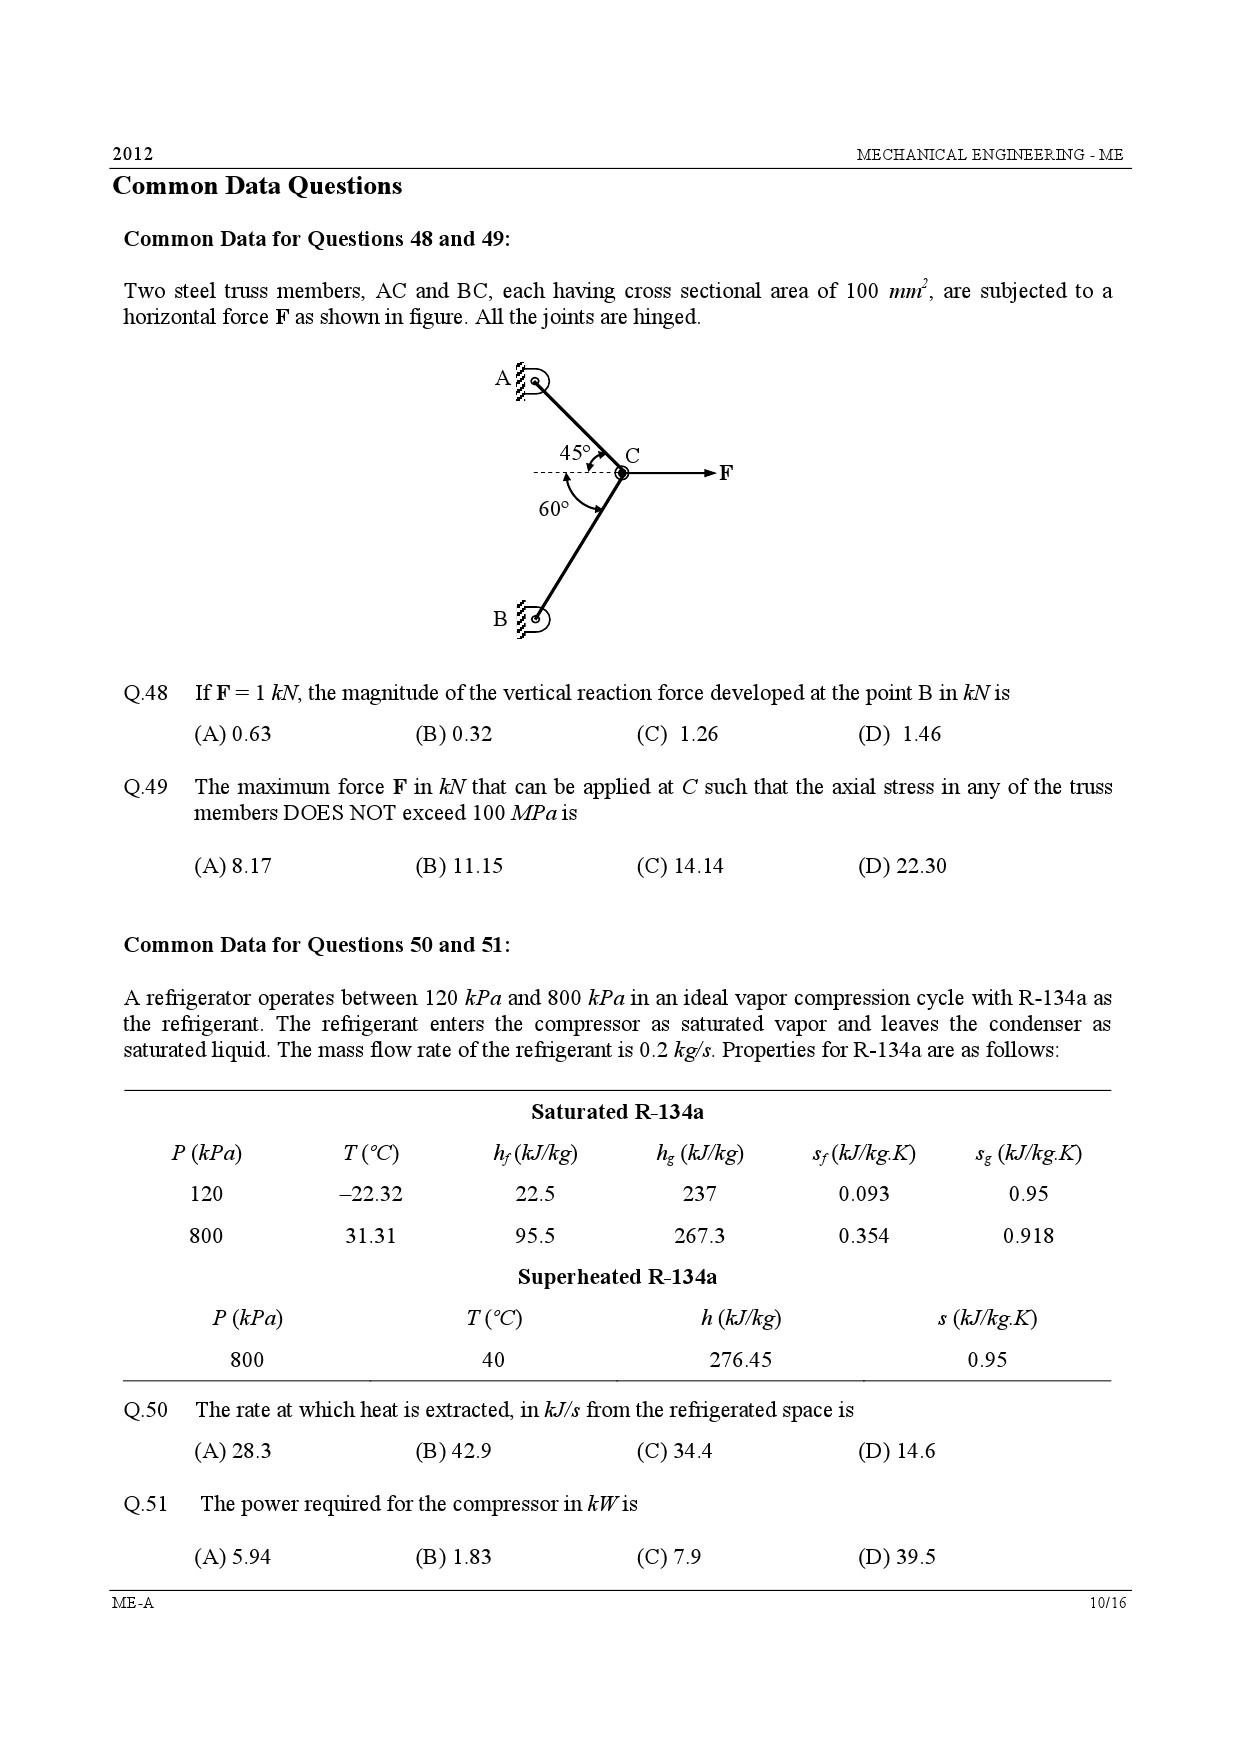 GATE Exam Question Paper 2012 Mechanical Engineering 10